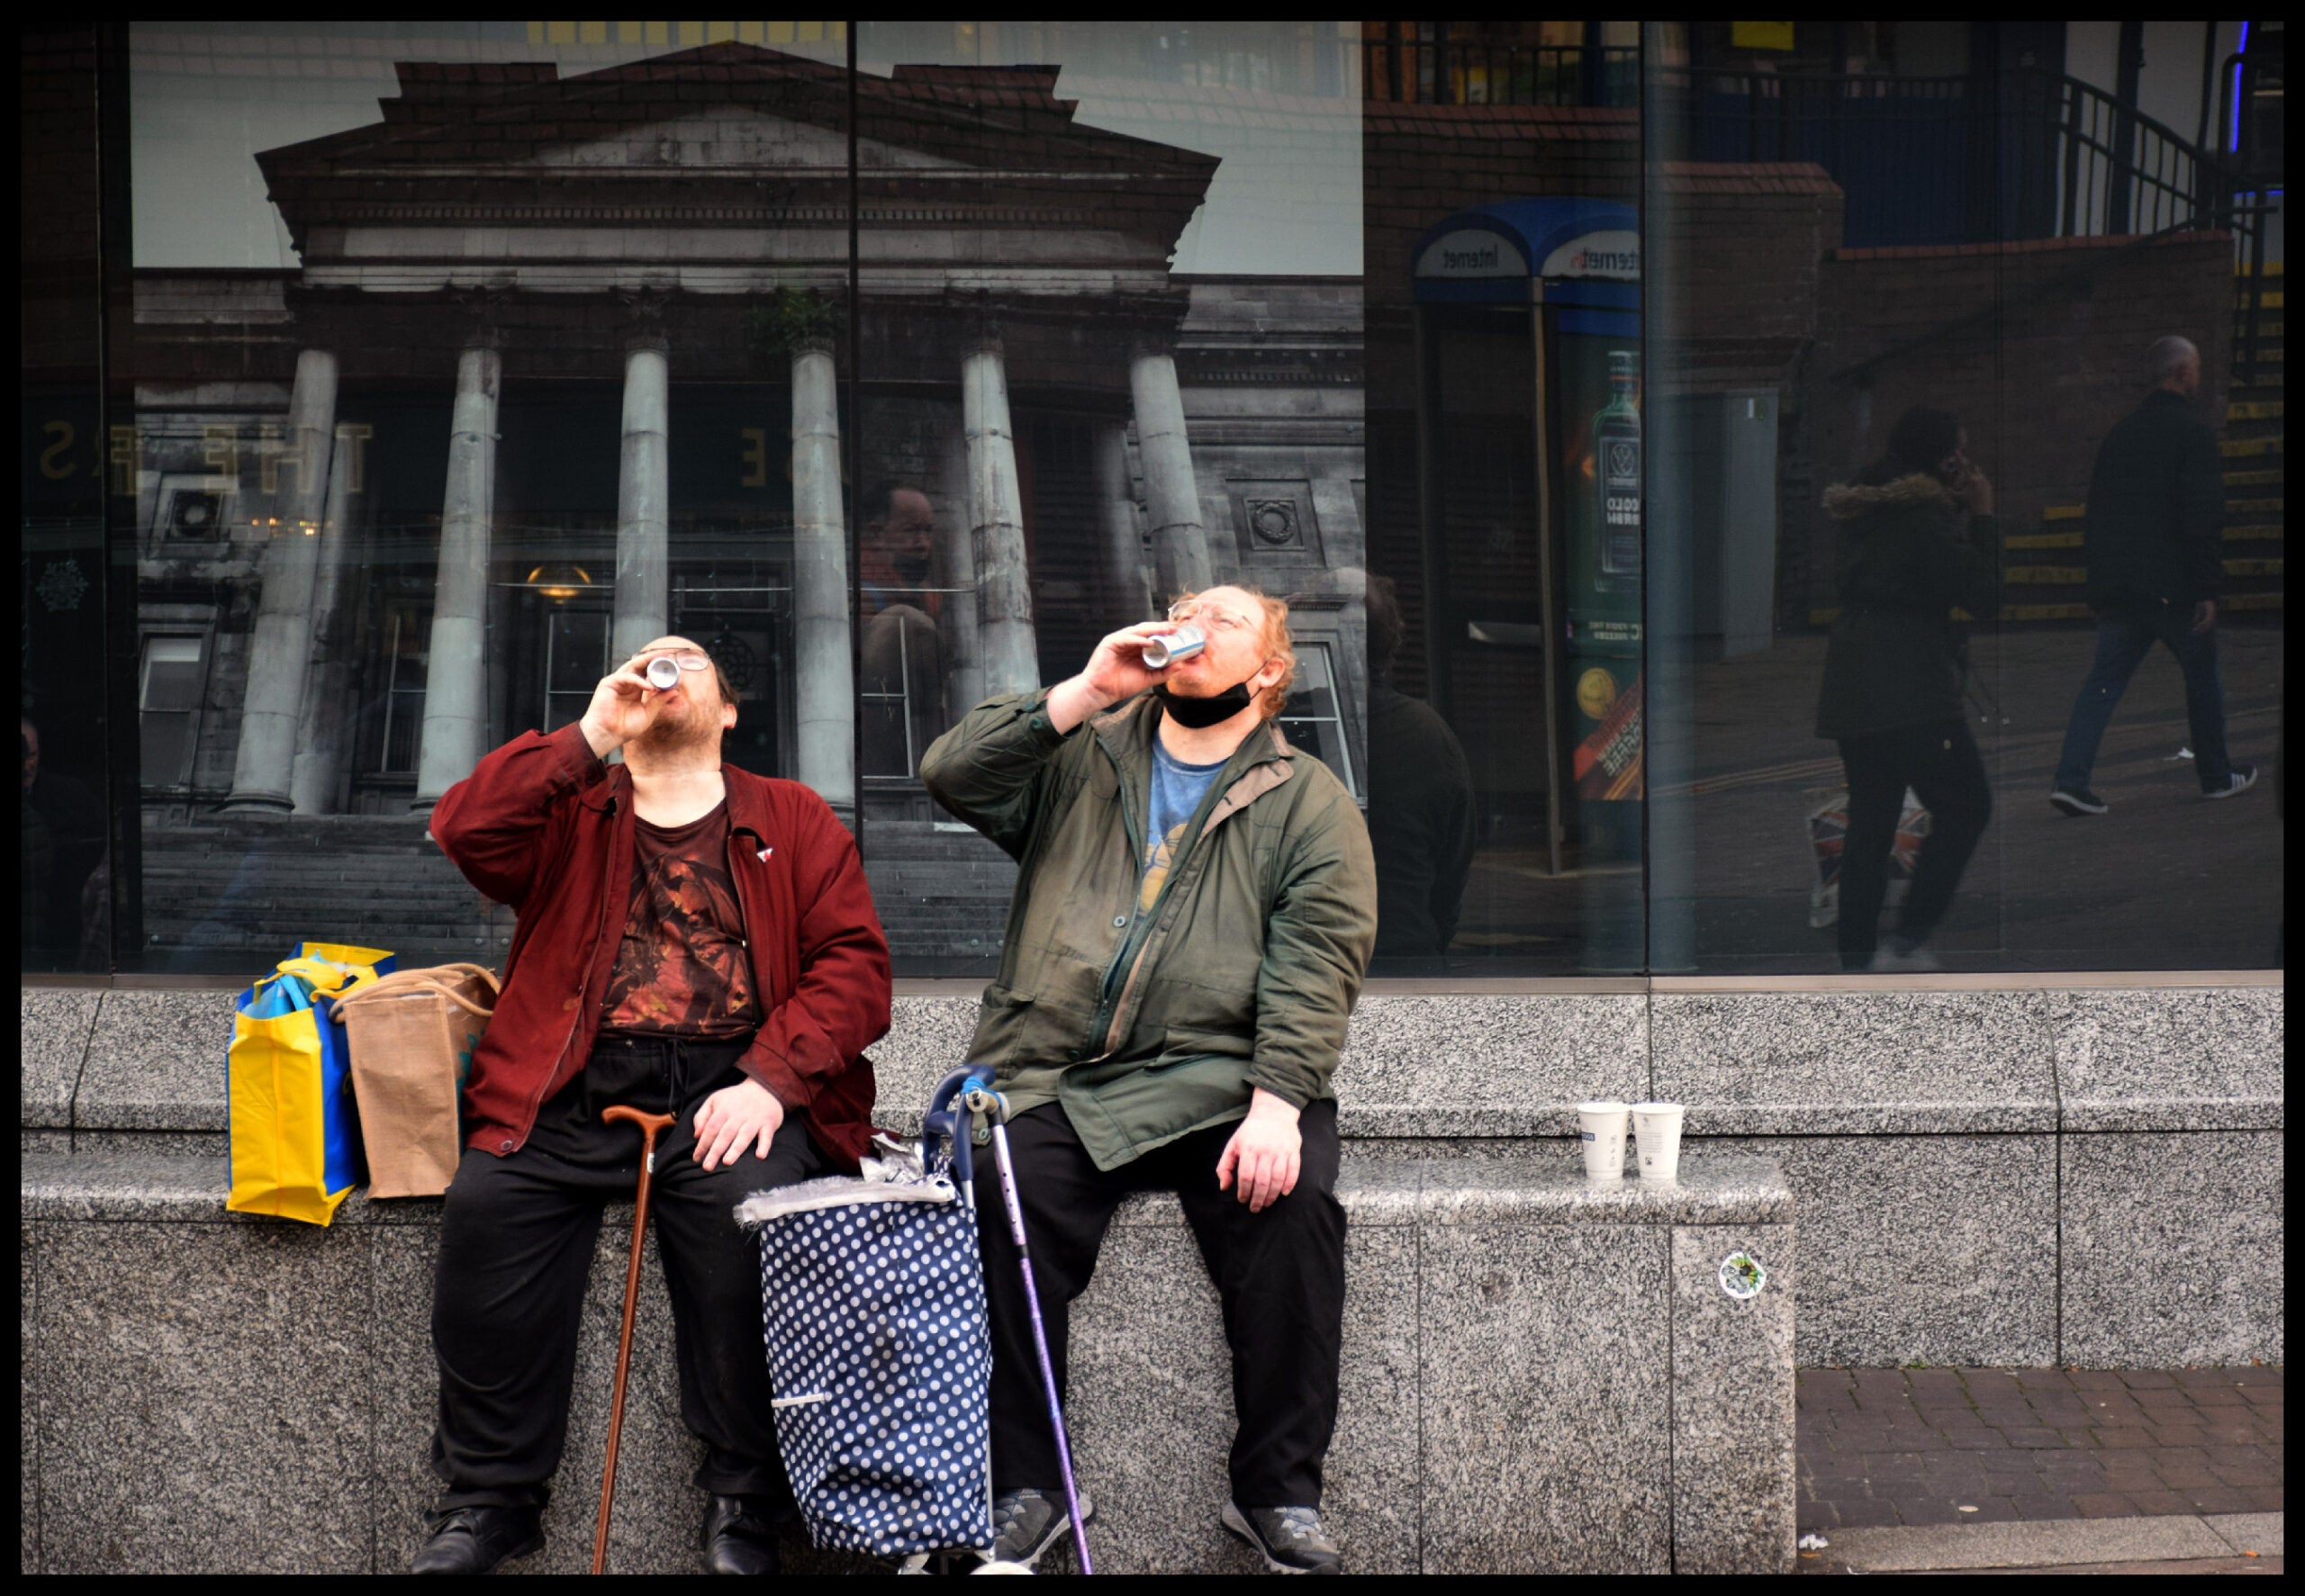 A candid shot of two people enjoying a beverage on the street